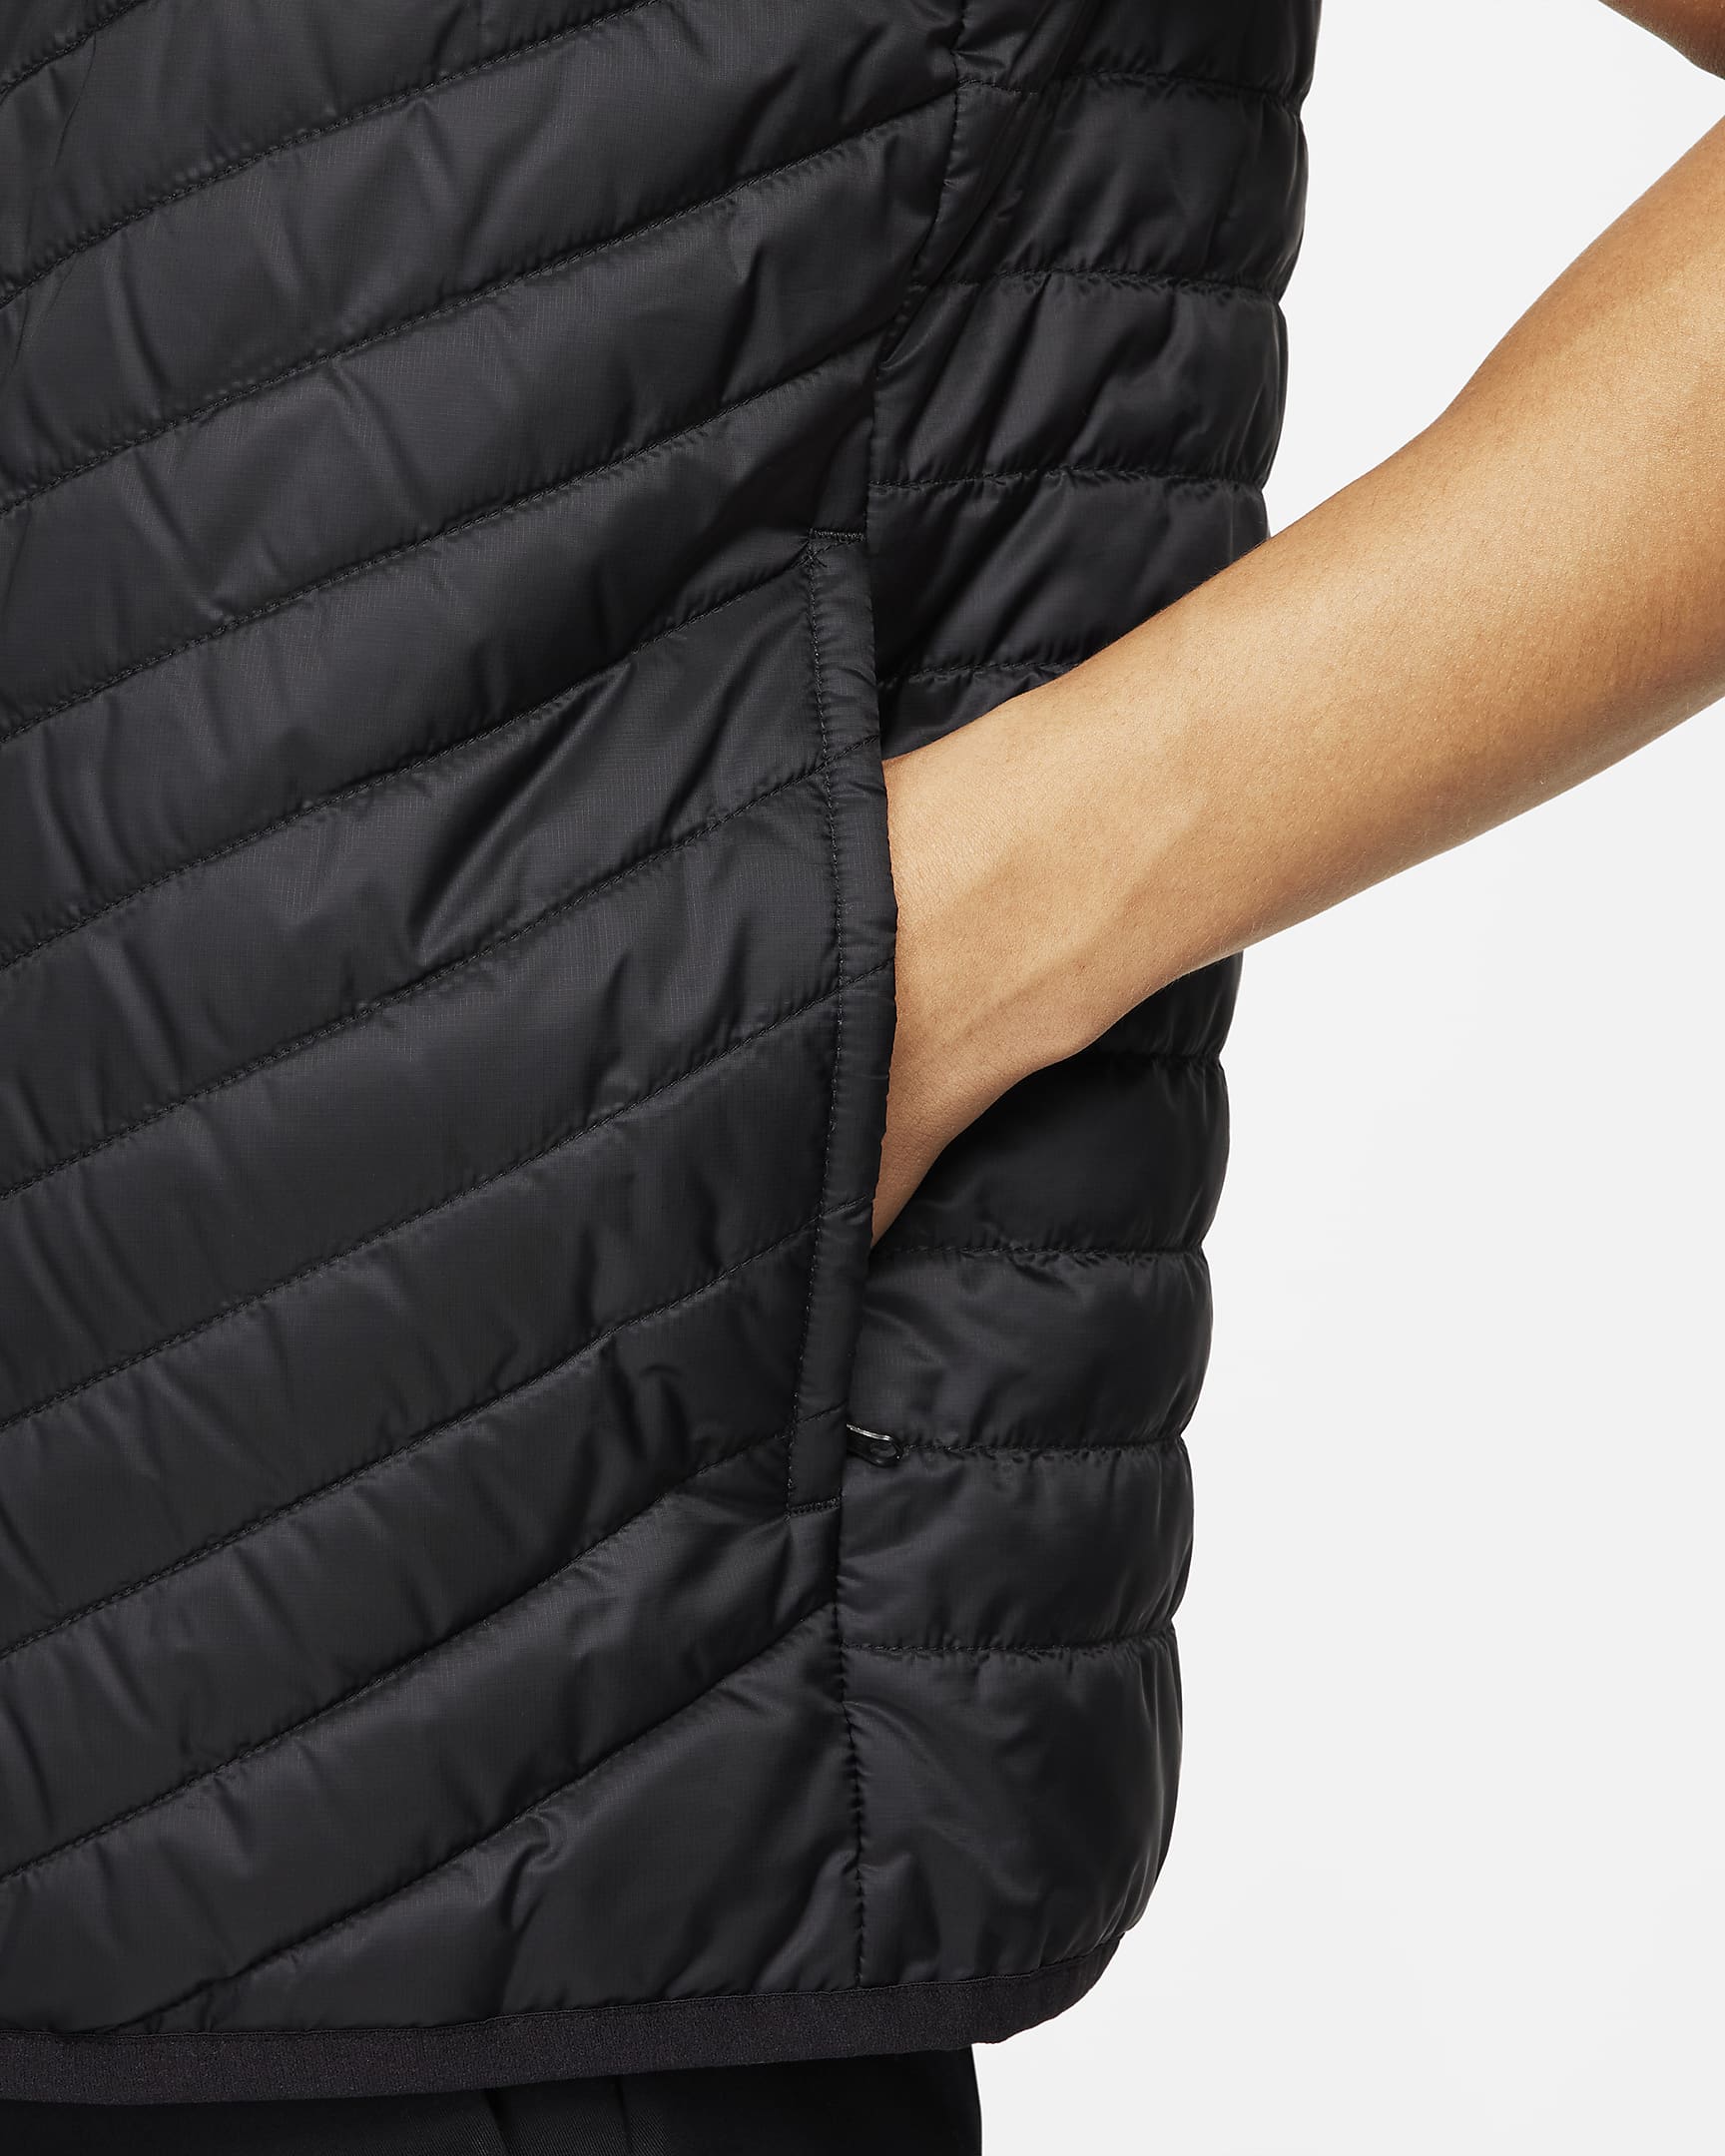 Nike Therma-FIT Windrunner Men's Midweight Puffer Vest. Nike JP